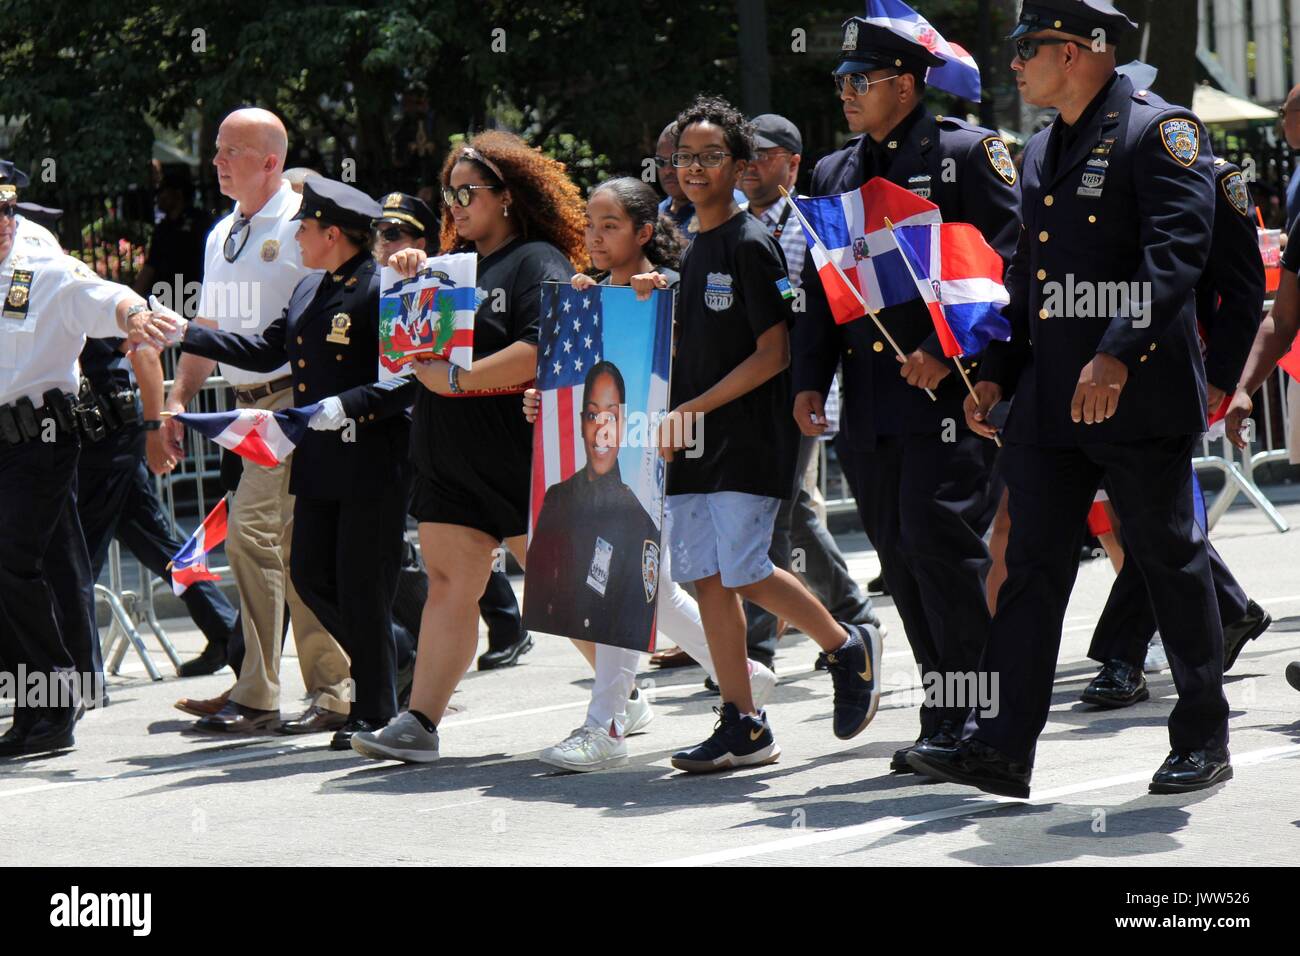 New York, NY, US. 13th. Aug, 2017. This year’s 35th. annual Dominican Day Parade in midtown Manhattan honored NYPD Officer Miosotis Familia, who was killed in the line of duty in the Bronx last month . The thousands who gathered to display Dominican pride witnessed the city honor the slain officer with a posthumous lifetime service award. There is an estimated 700,000 plus citizens from the Caribbean island of the Dominican Republic living in the New York-area. © G. Ronald Lopez /DigiPixsAgain.us/Alamy Live News Stock Photo